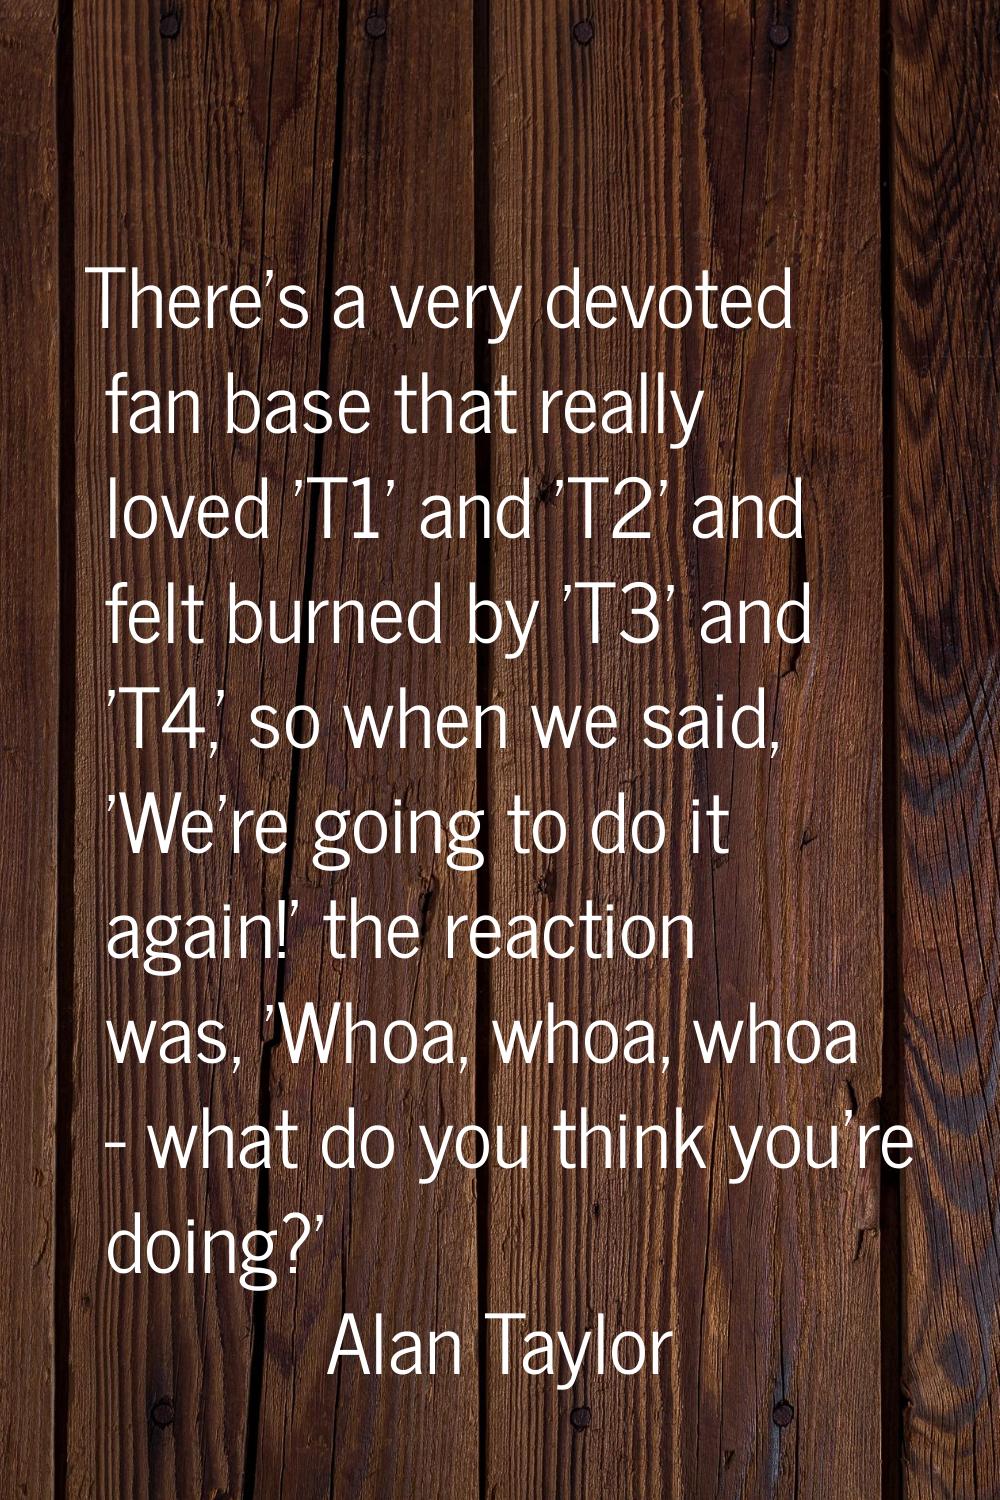 There's a very devoted fan base that really loved 'T1' and 'T2' and felt burned by 'T3' and 'T4,' s